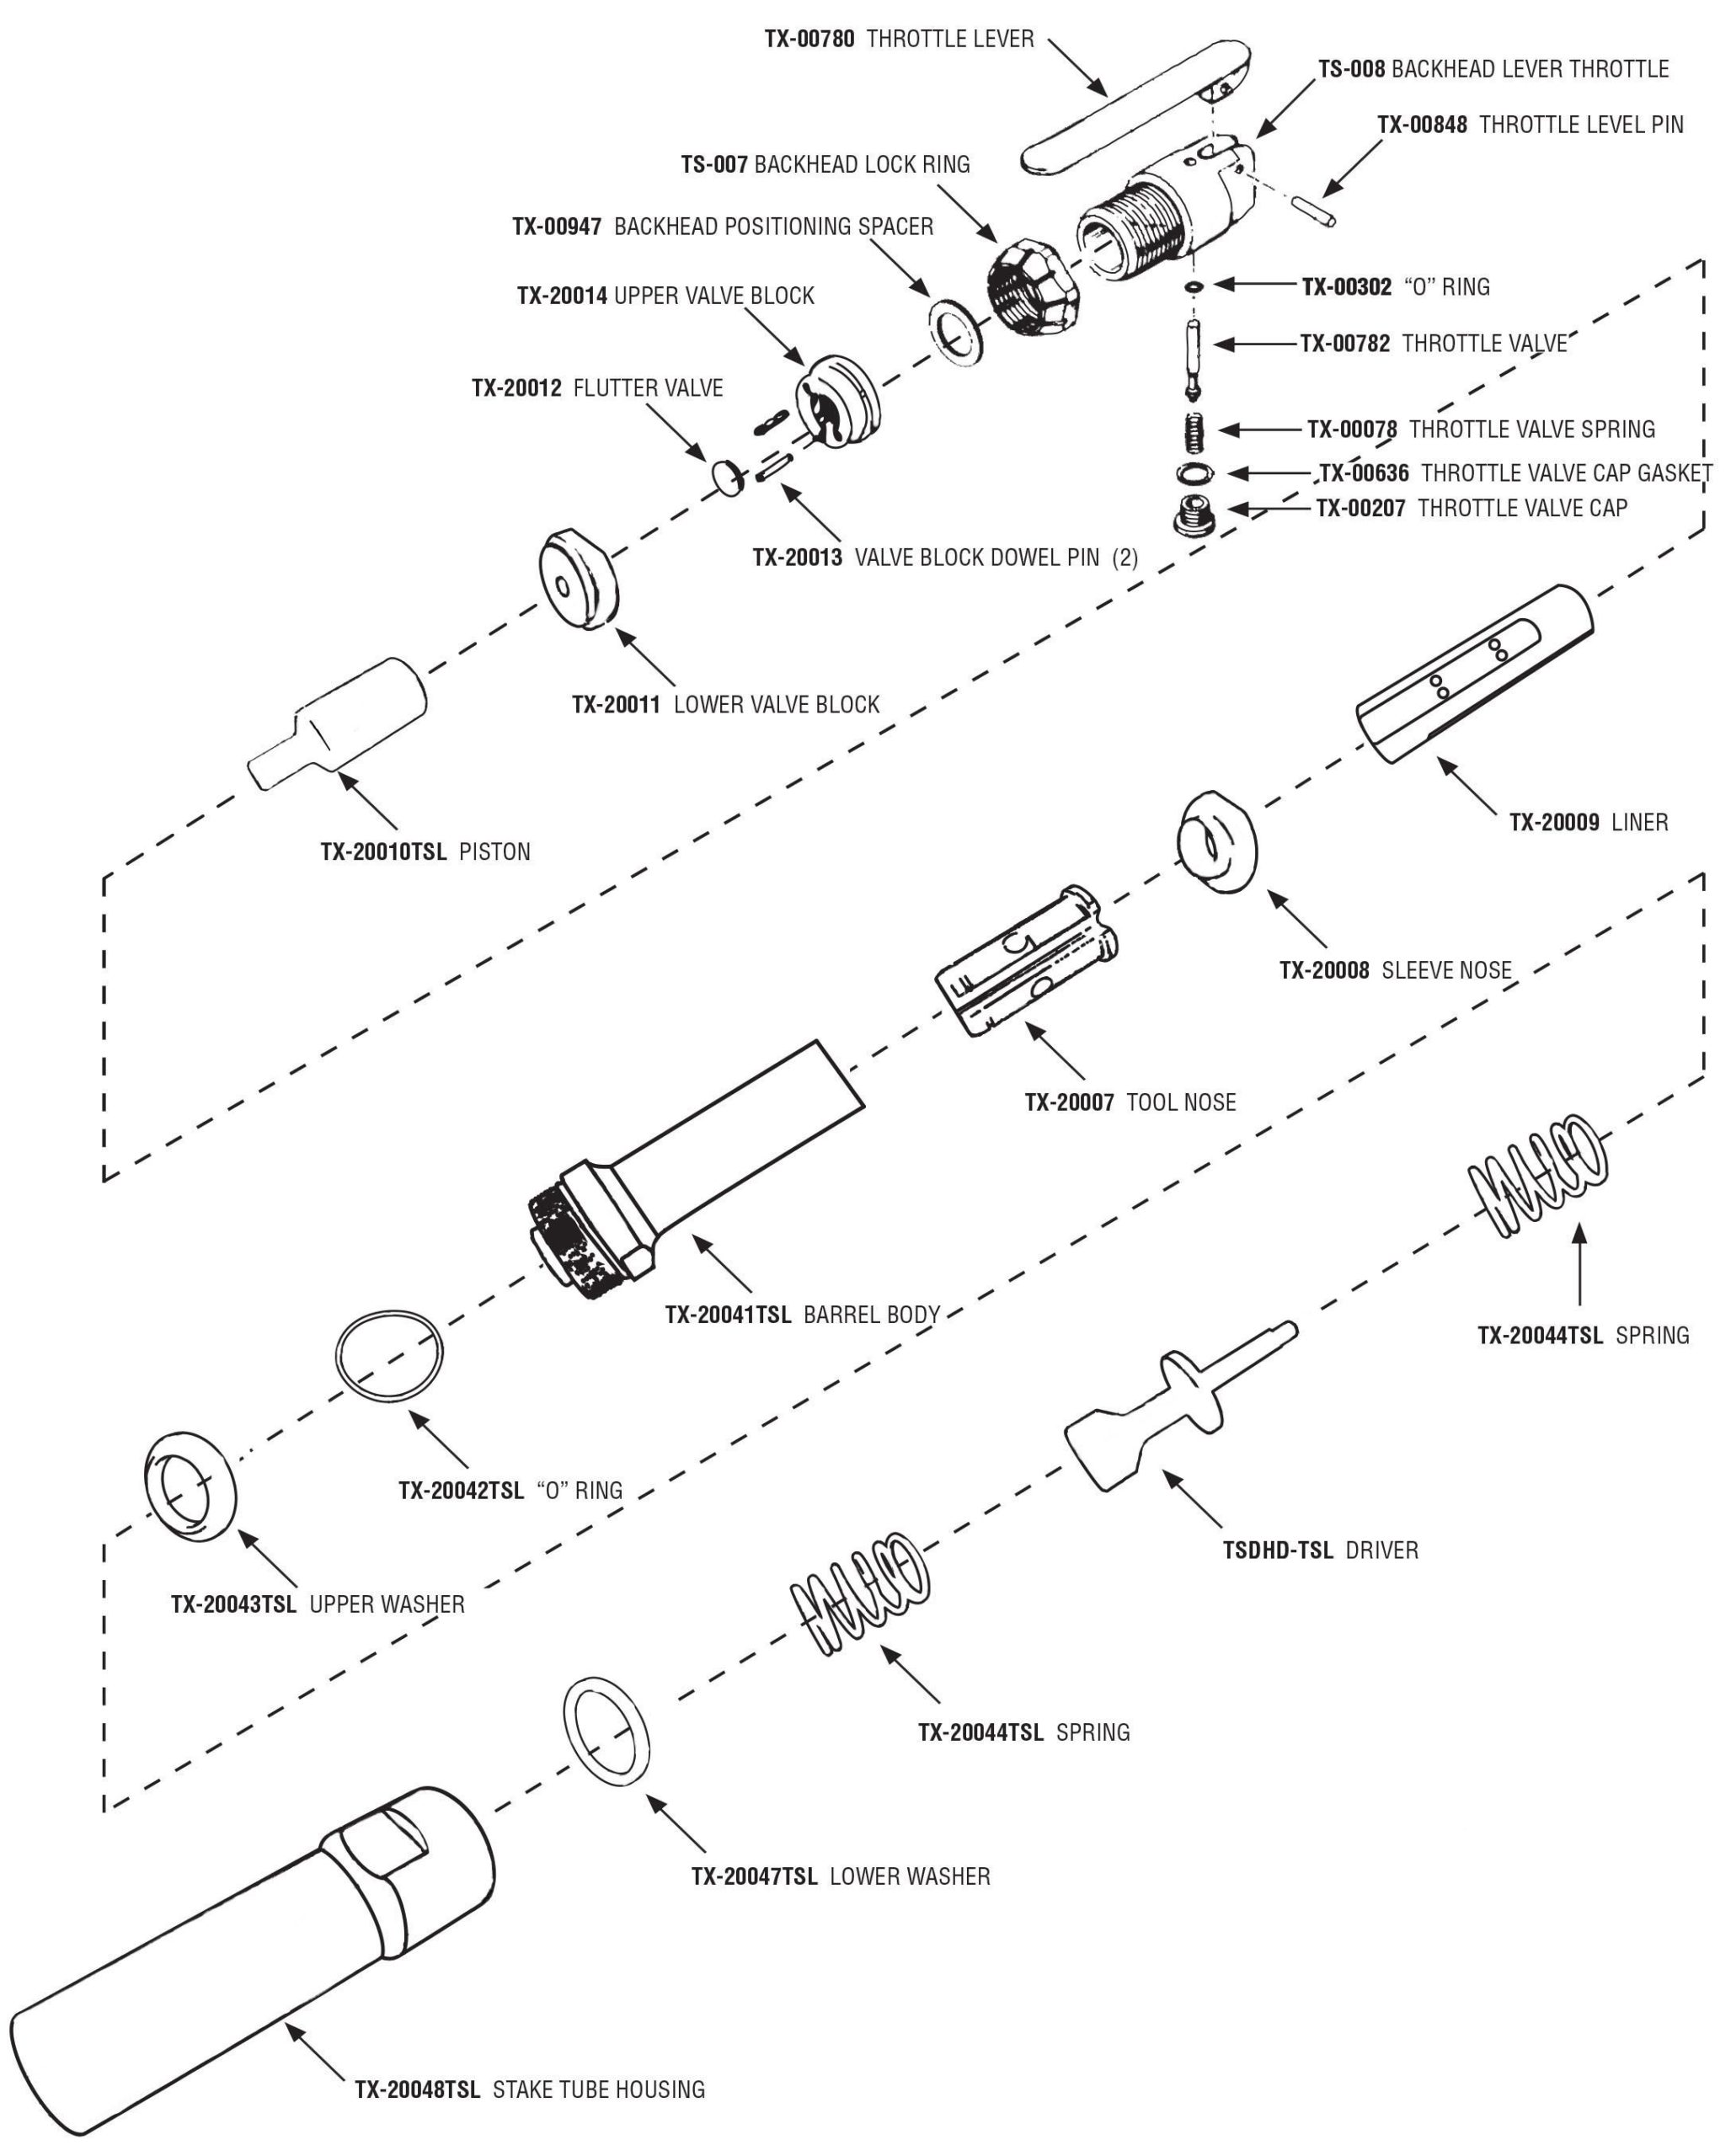 TX1000TSL Schematic & Replacement Parts for Texas Pneumatic Tools - TX-29RD-8/3 & TX-29RD-8/4 - Stake Drivers